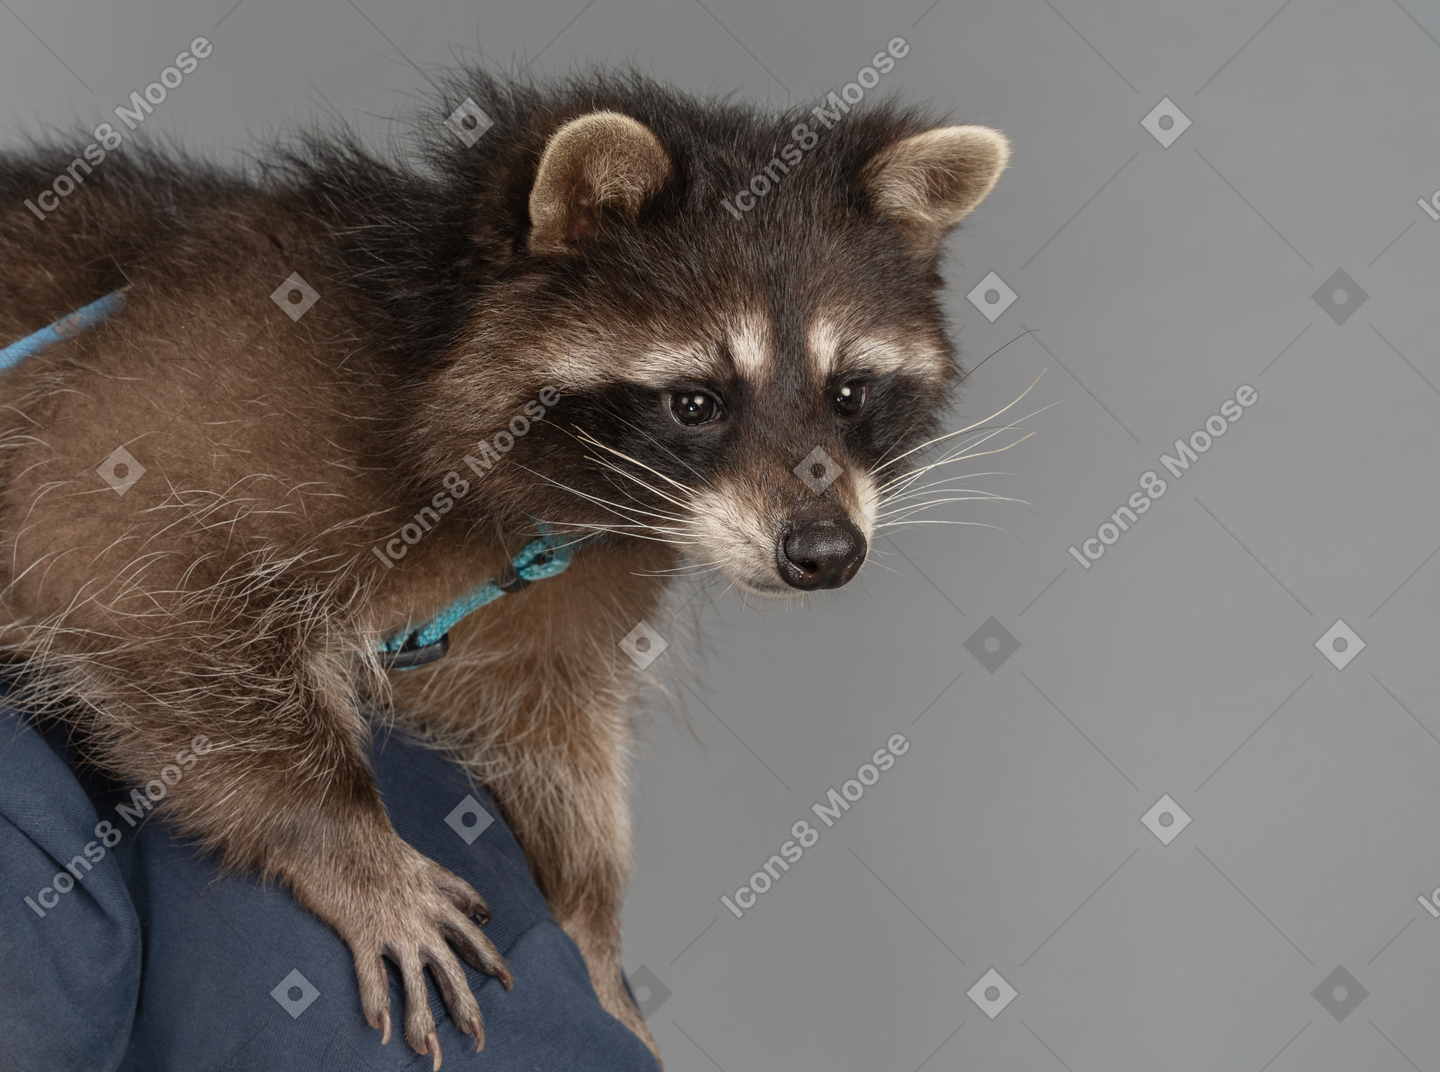 A raccoon held by a human